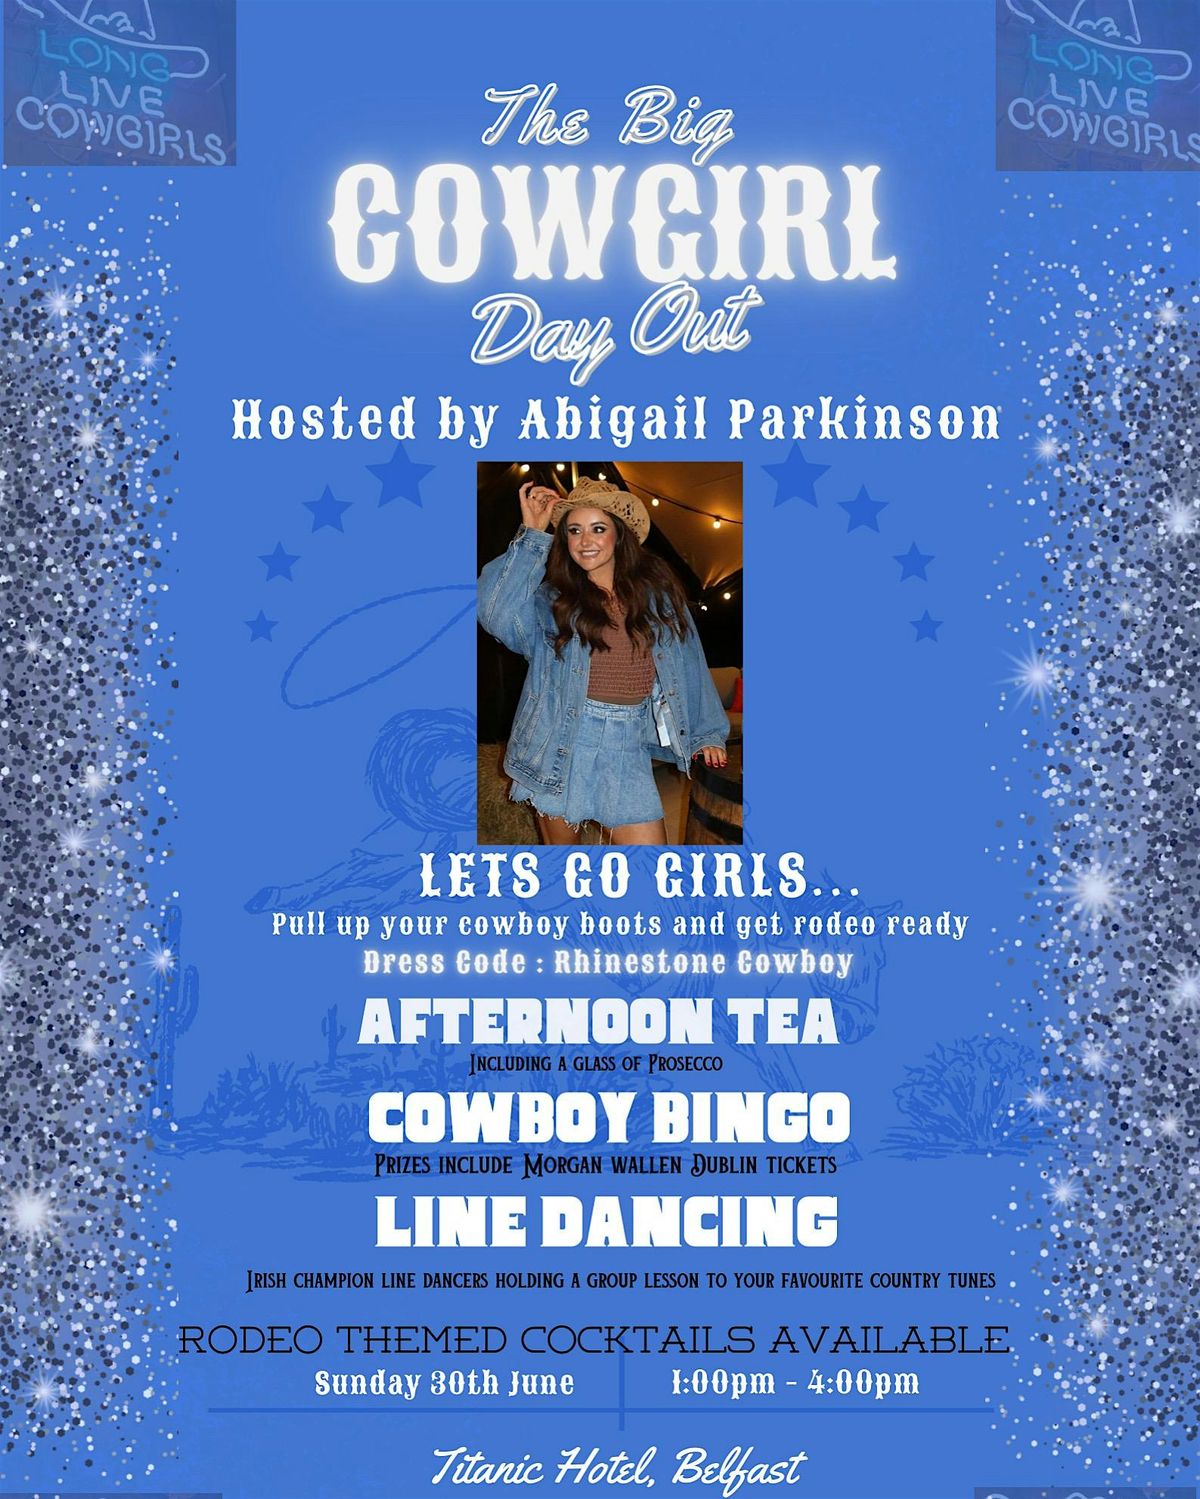 The Big Cowgirl Day Out by Abigail Parkinson